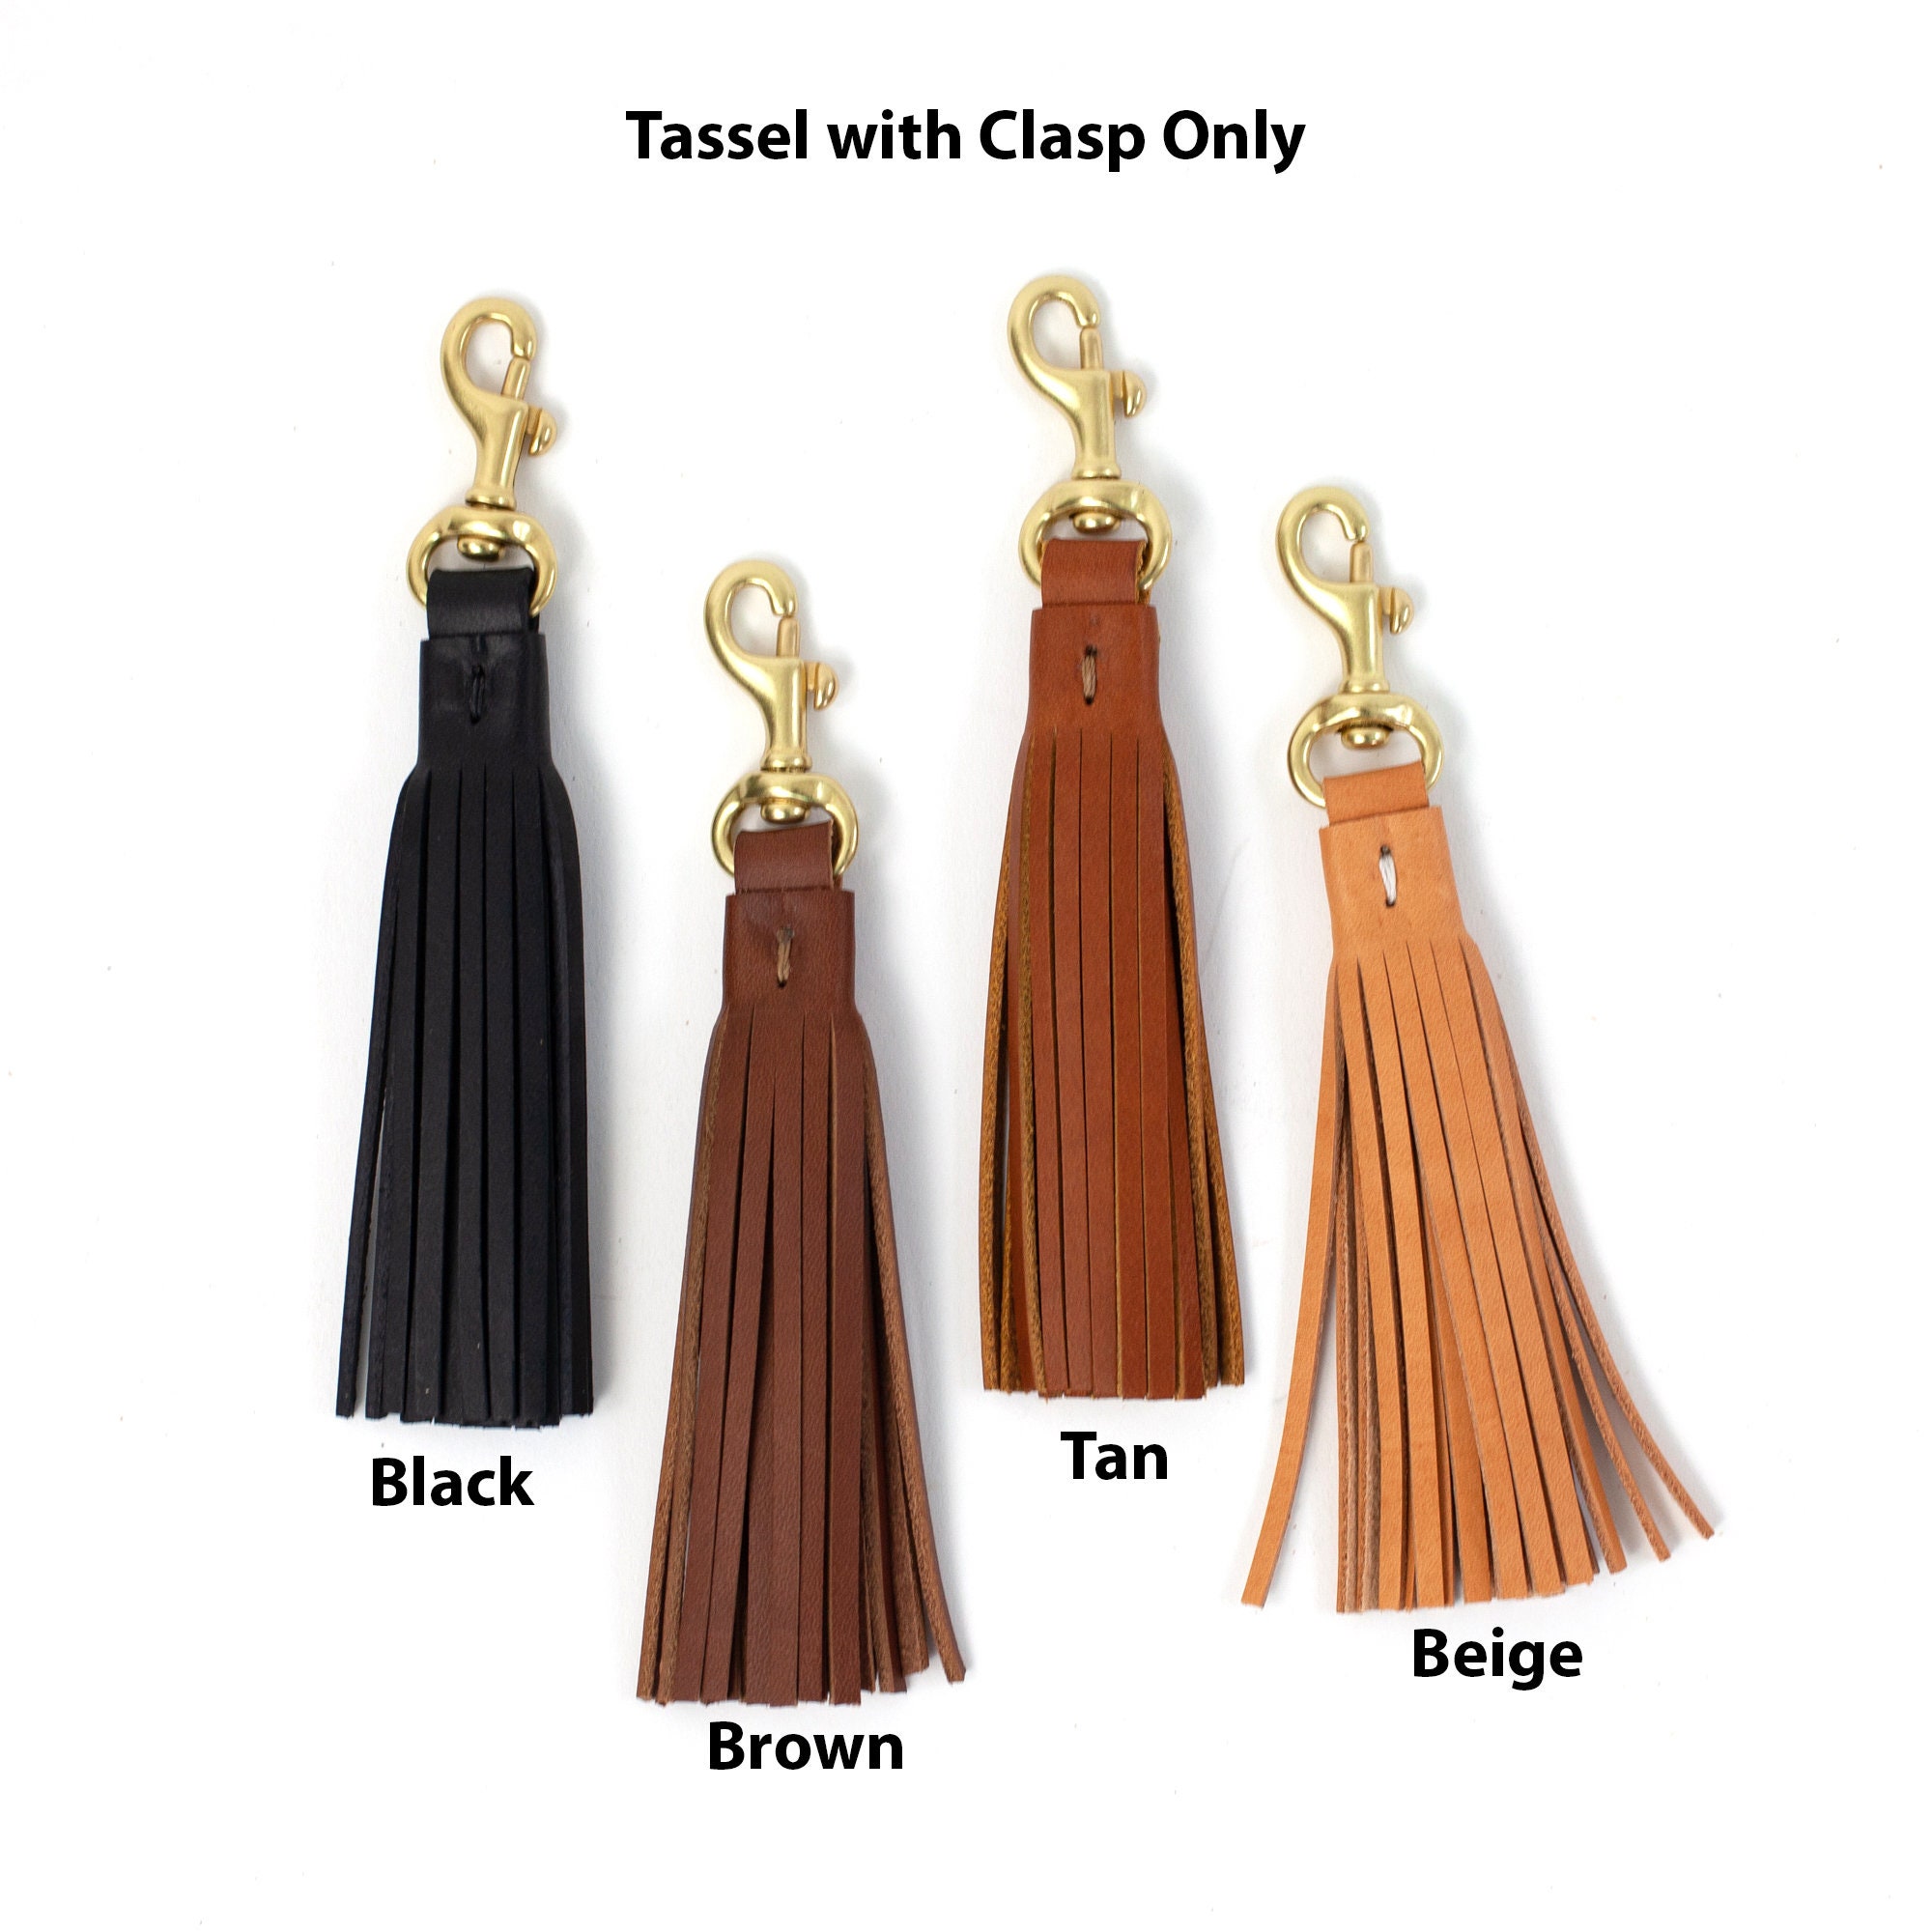 Leather Key Chains Rings Jewelry Brown Flower Plaid Tassel Coin Purse  Keyrings Pendant Fashion Mini Storage Bag Charm Keychains Accessories From  Yambags, $2.37